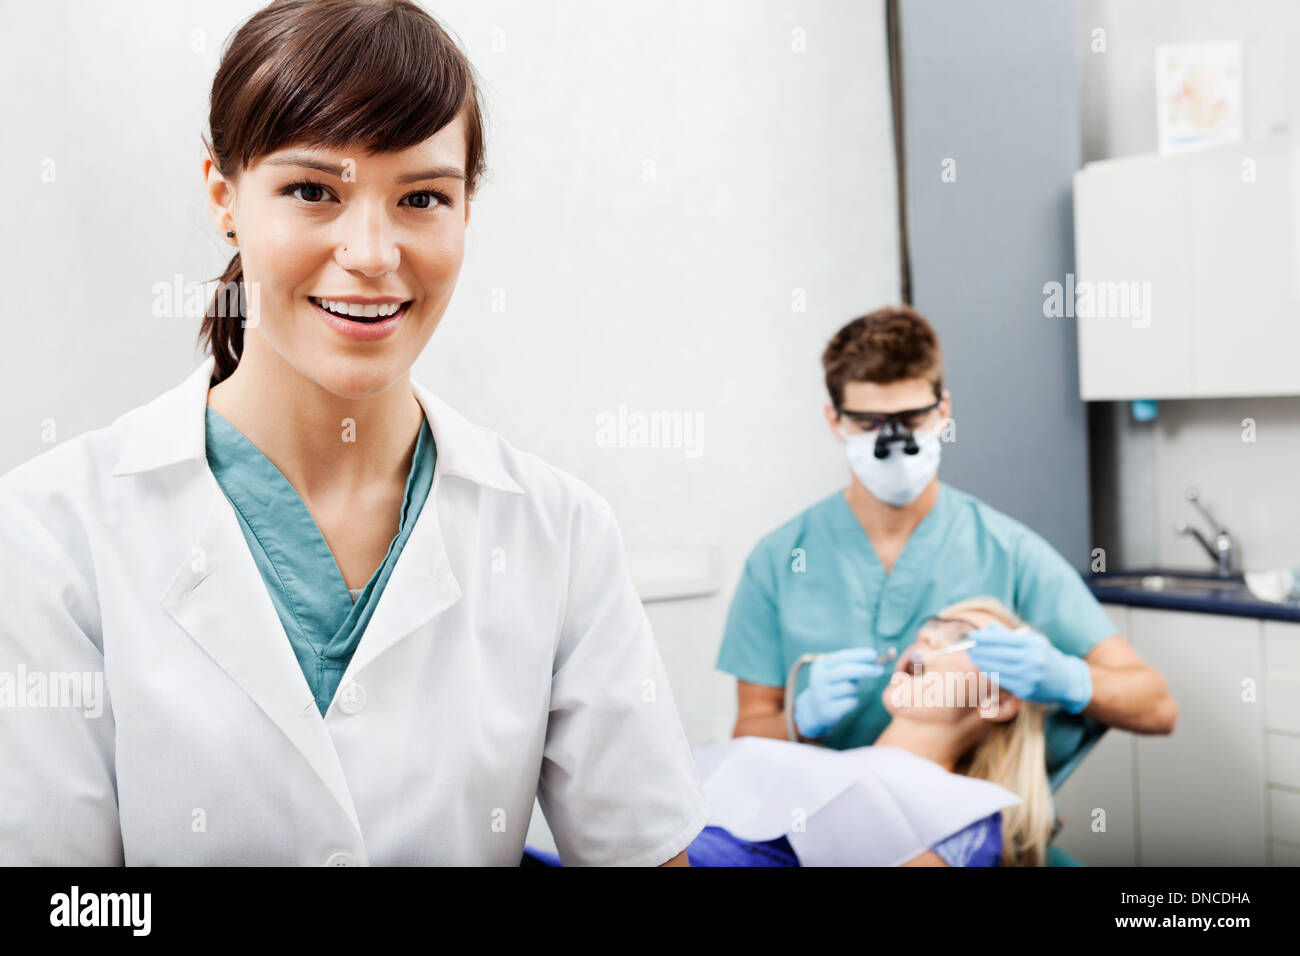 Female Assistant With Dentist Working In The Background Stock Photo